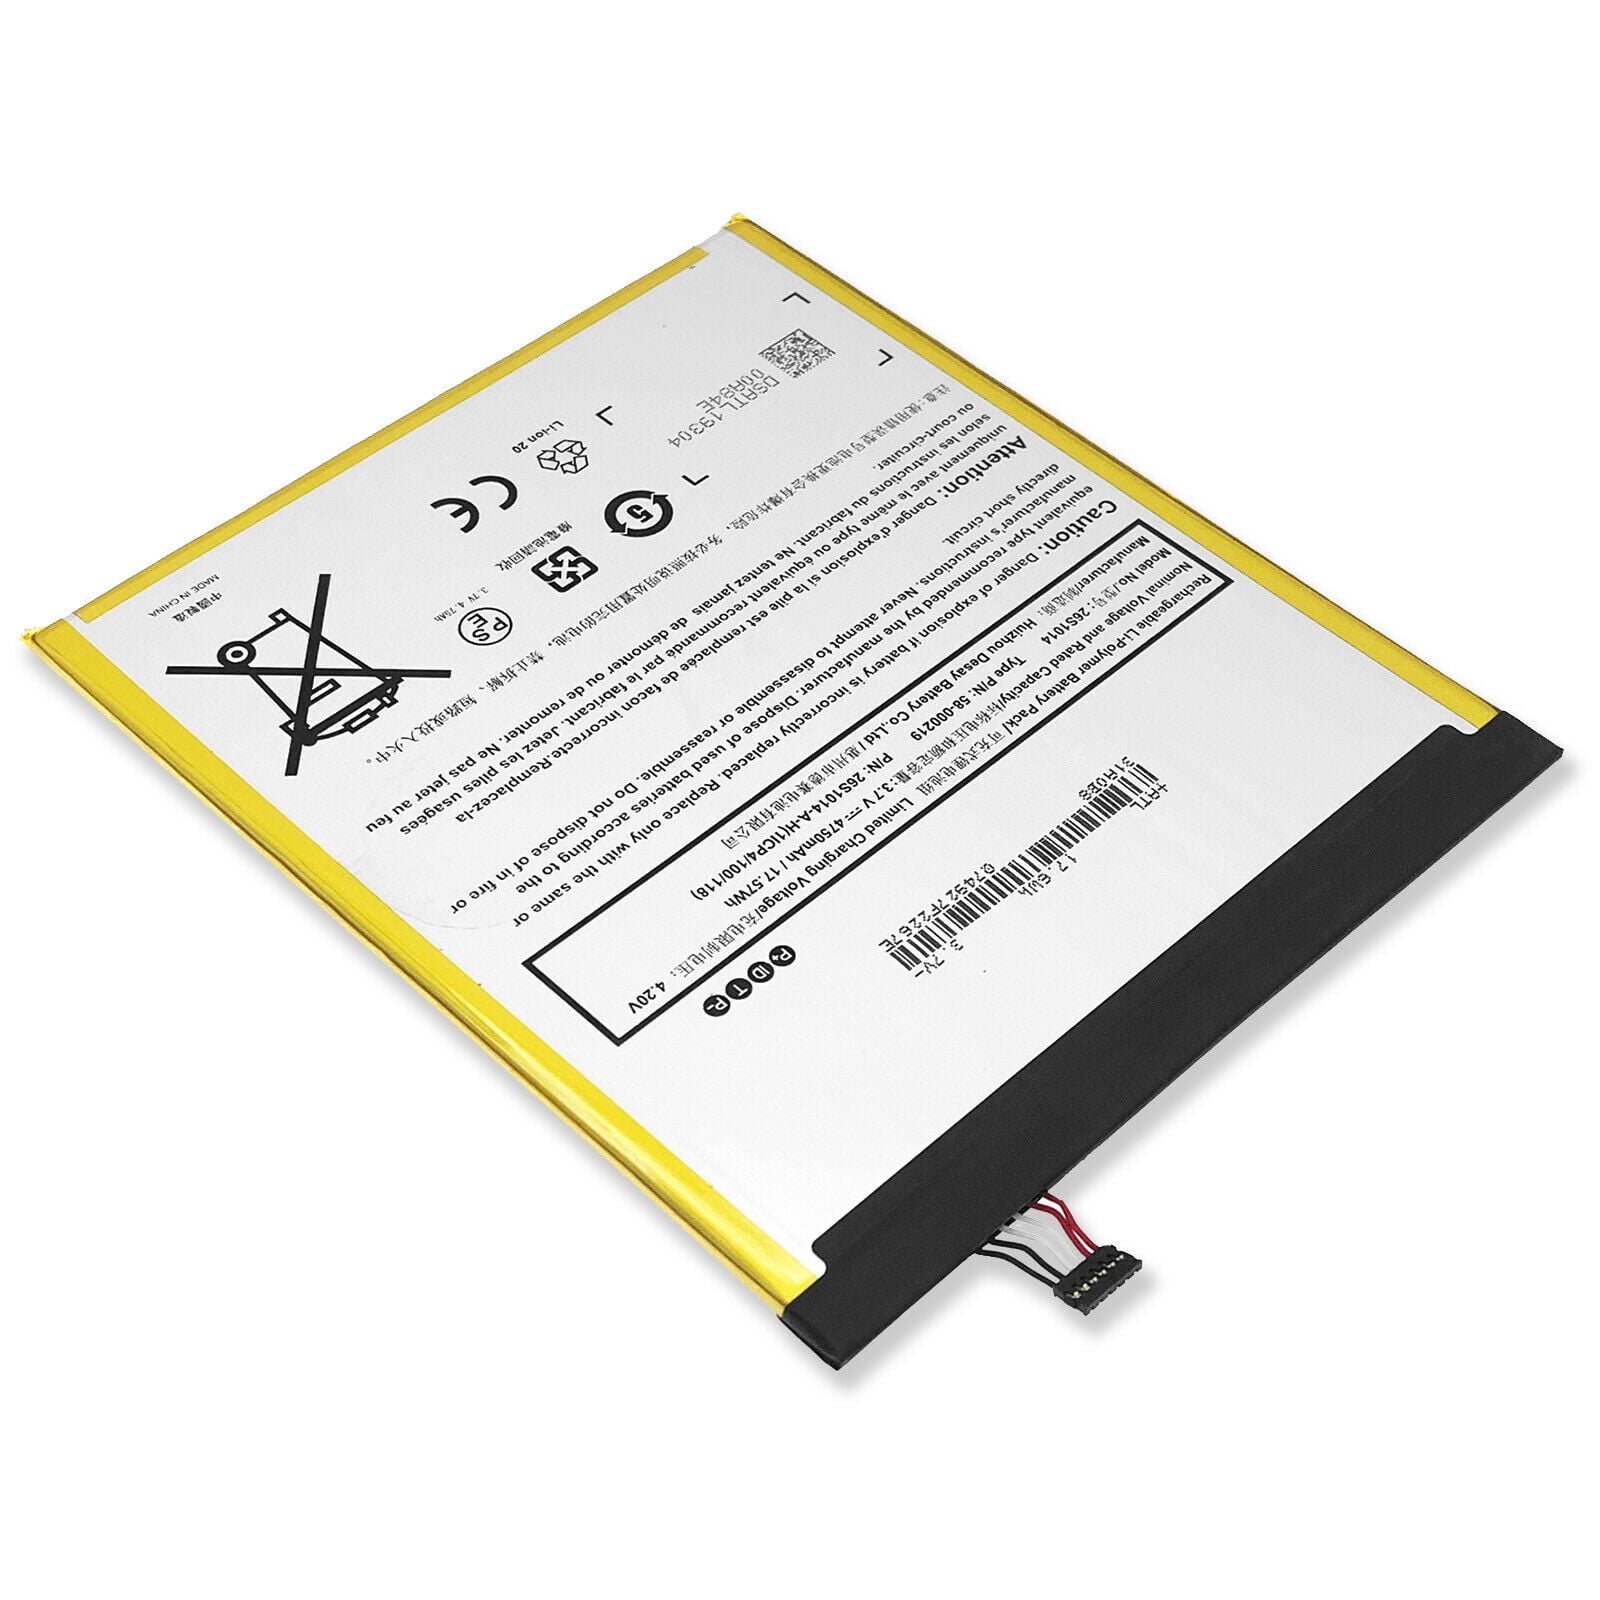 Replacement Battery for AMZO F/ire e 8 7 Generation SX034QT F/ire 8.7 SX0340T L5S83A F/ire HD8 8TH Part no 26S1014 58-000181 MC-31A0B8 58-000219 